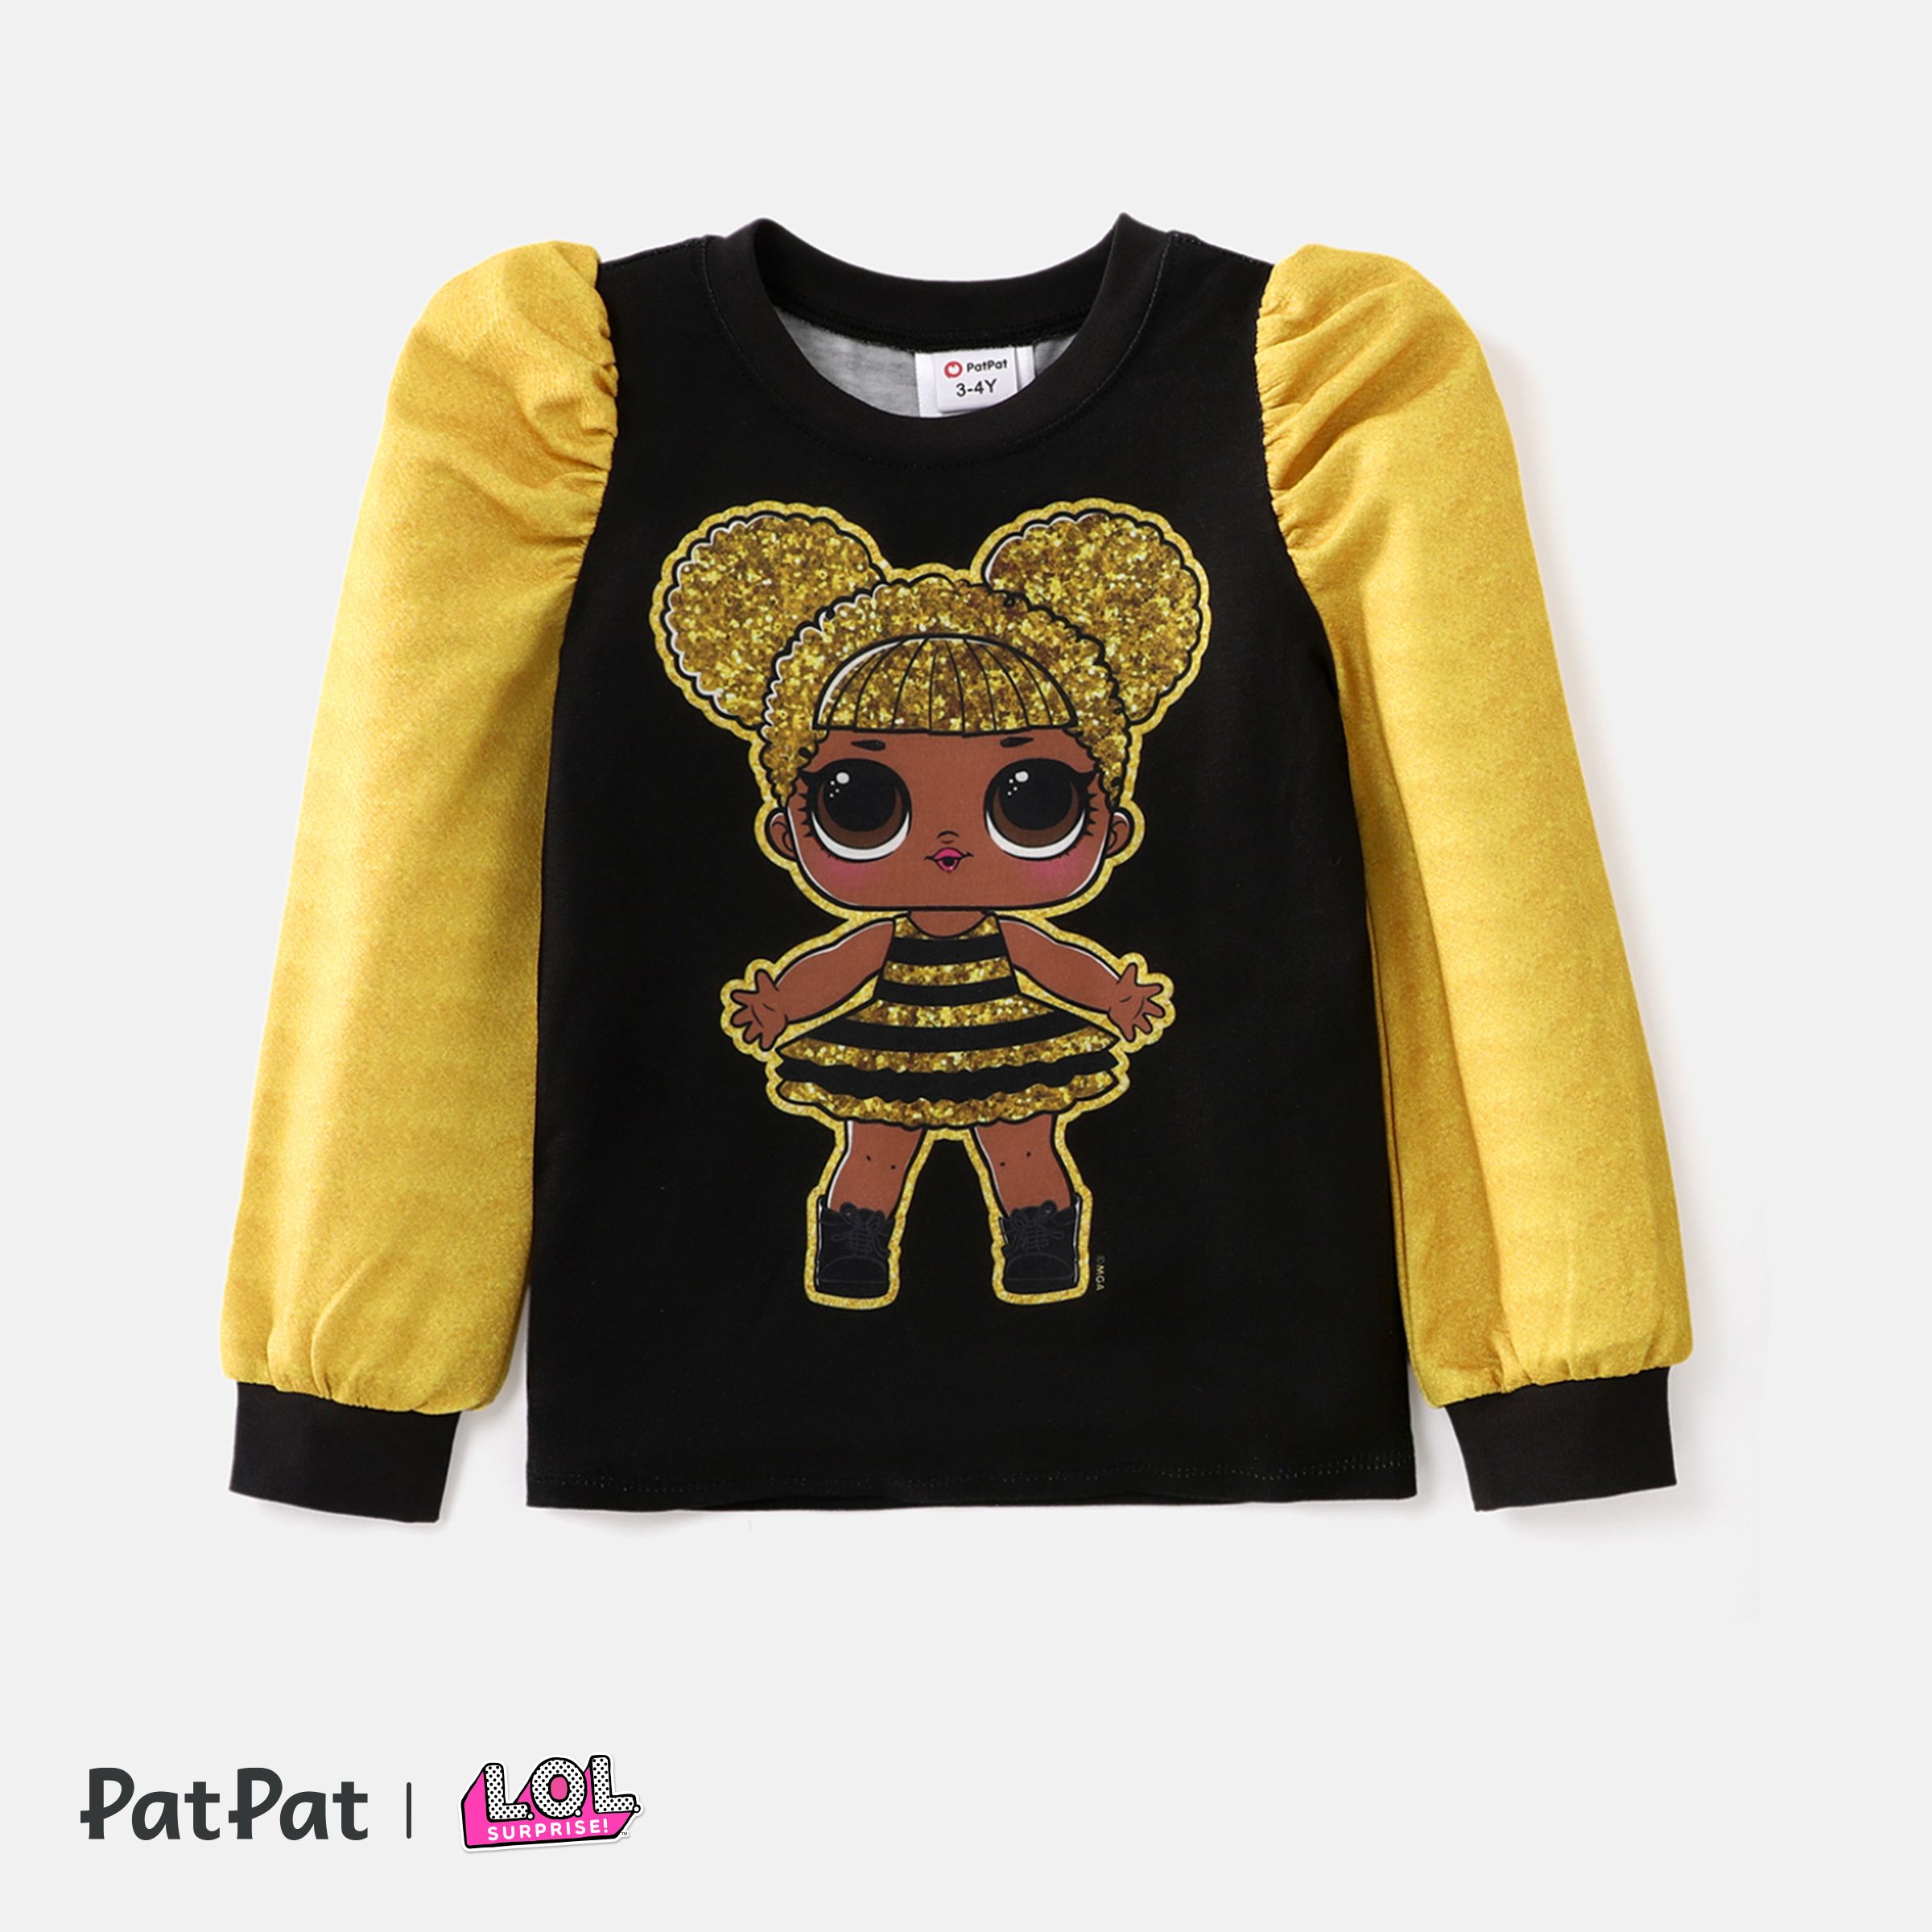 L.O.L. SURPRISE! Toddler Girl Graphic Print Puff-sleeve Top Or Pants Set